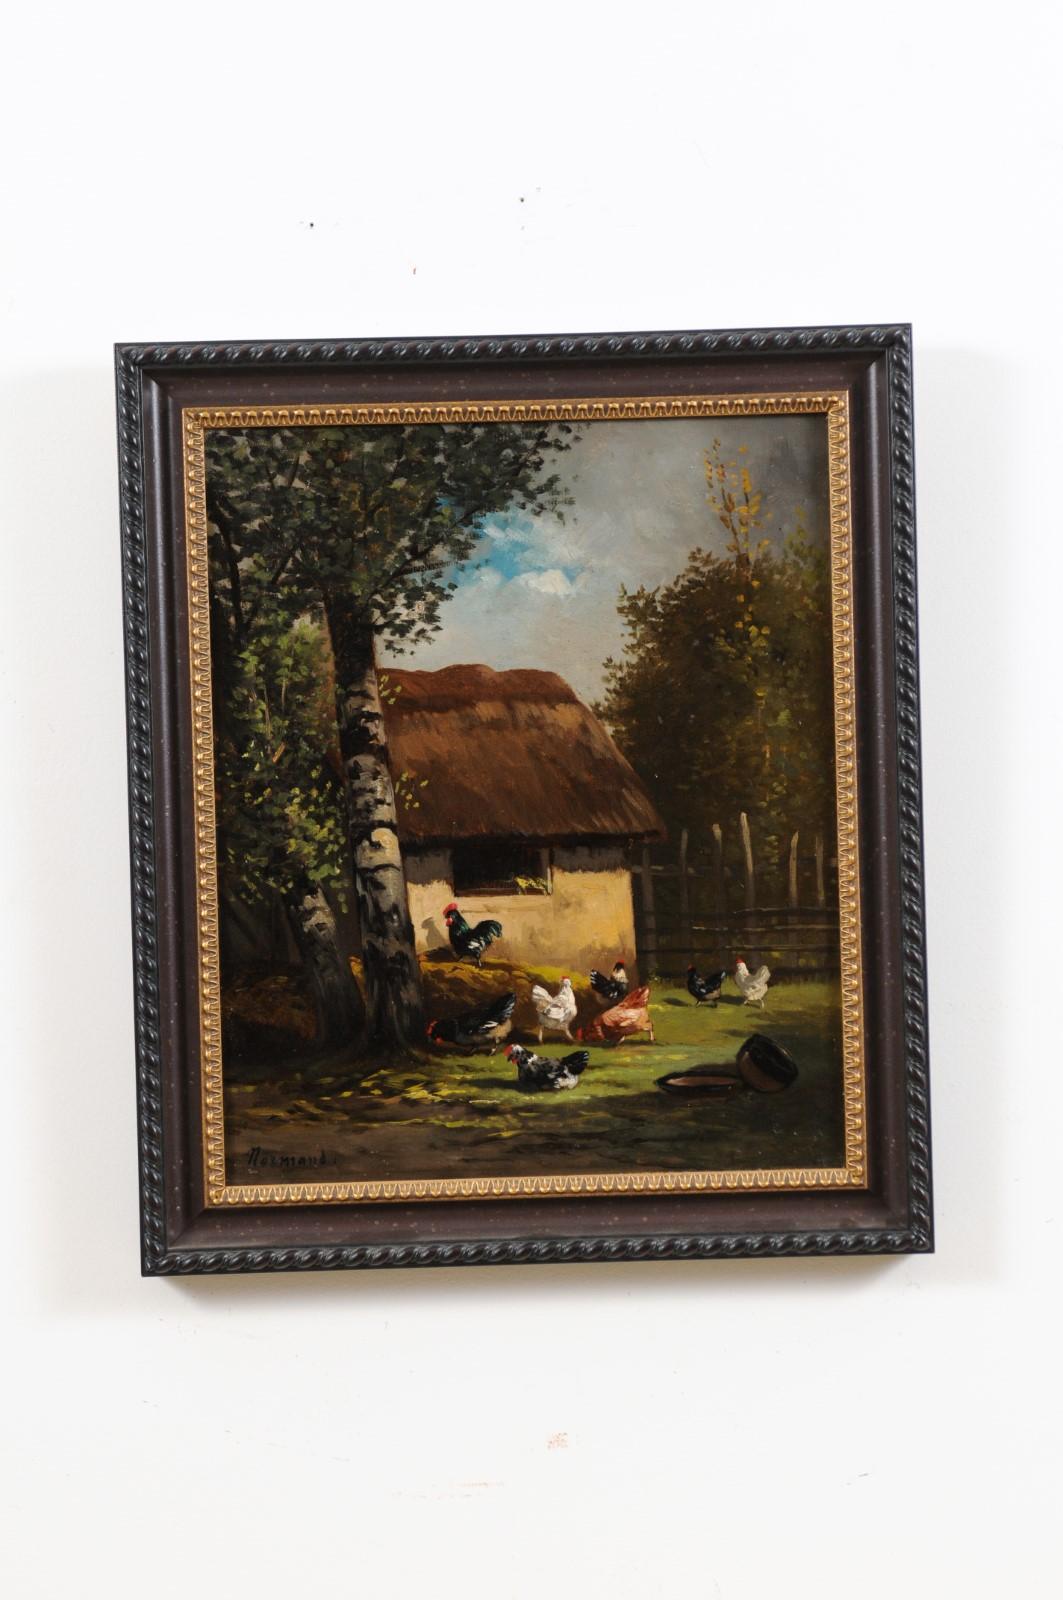 A small French oil on canvas framed painting from the 19th century, depicting a rooster and chickens in a barnyard, signed Normand. Created in France during the 19th century, this framed oil on canvas painting charms us with its humble depiction of